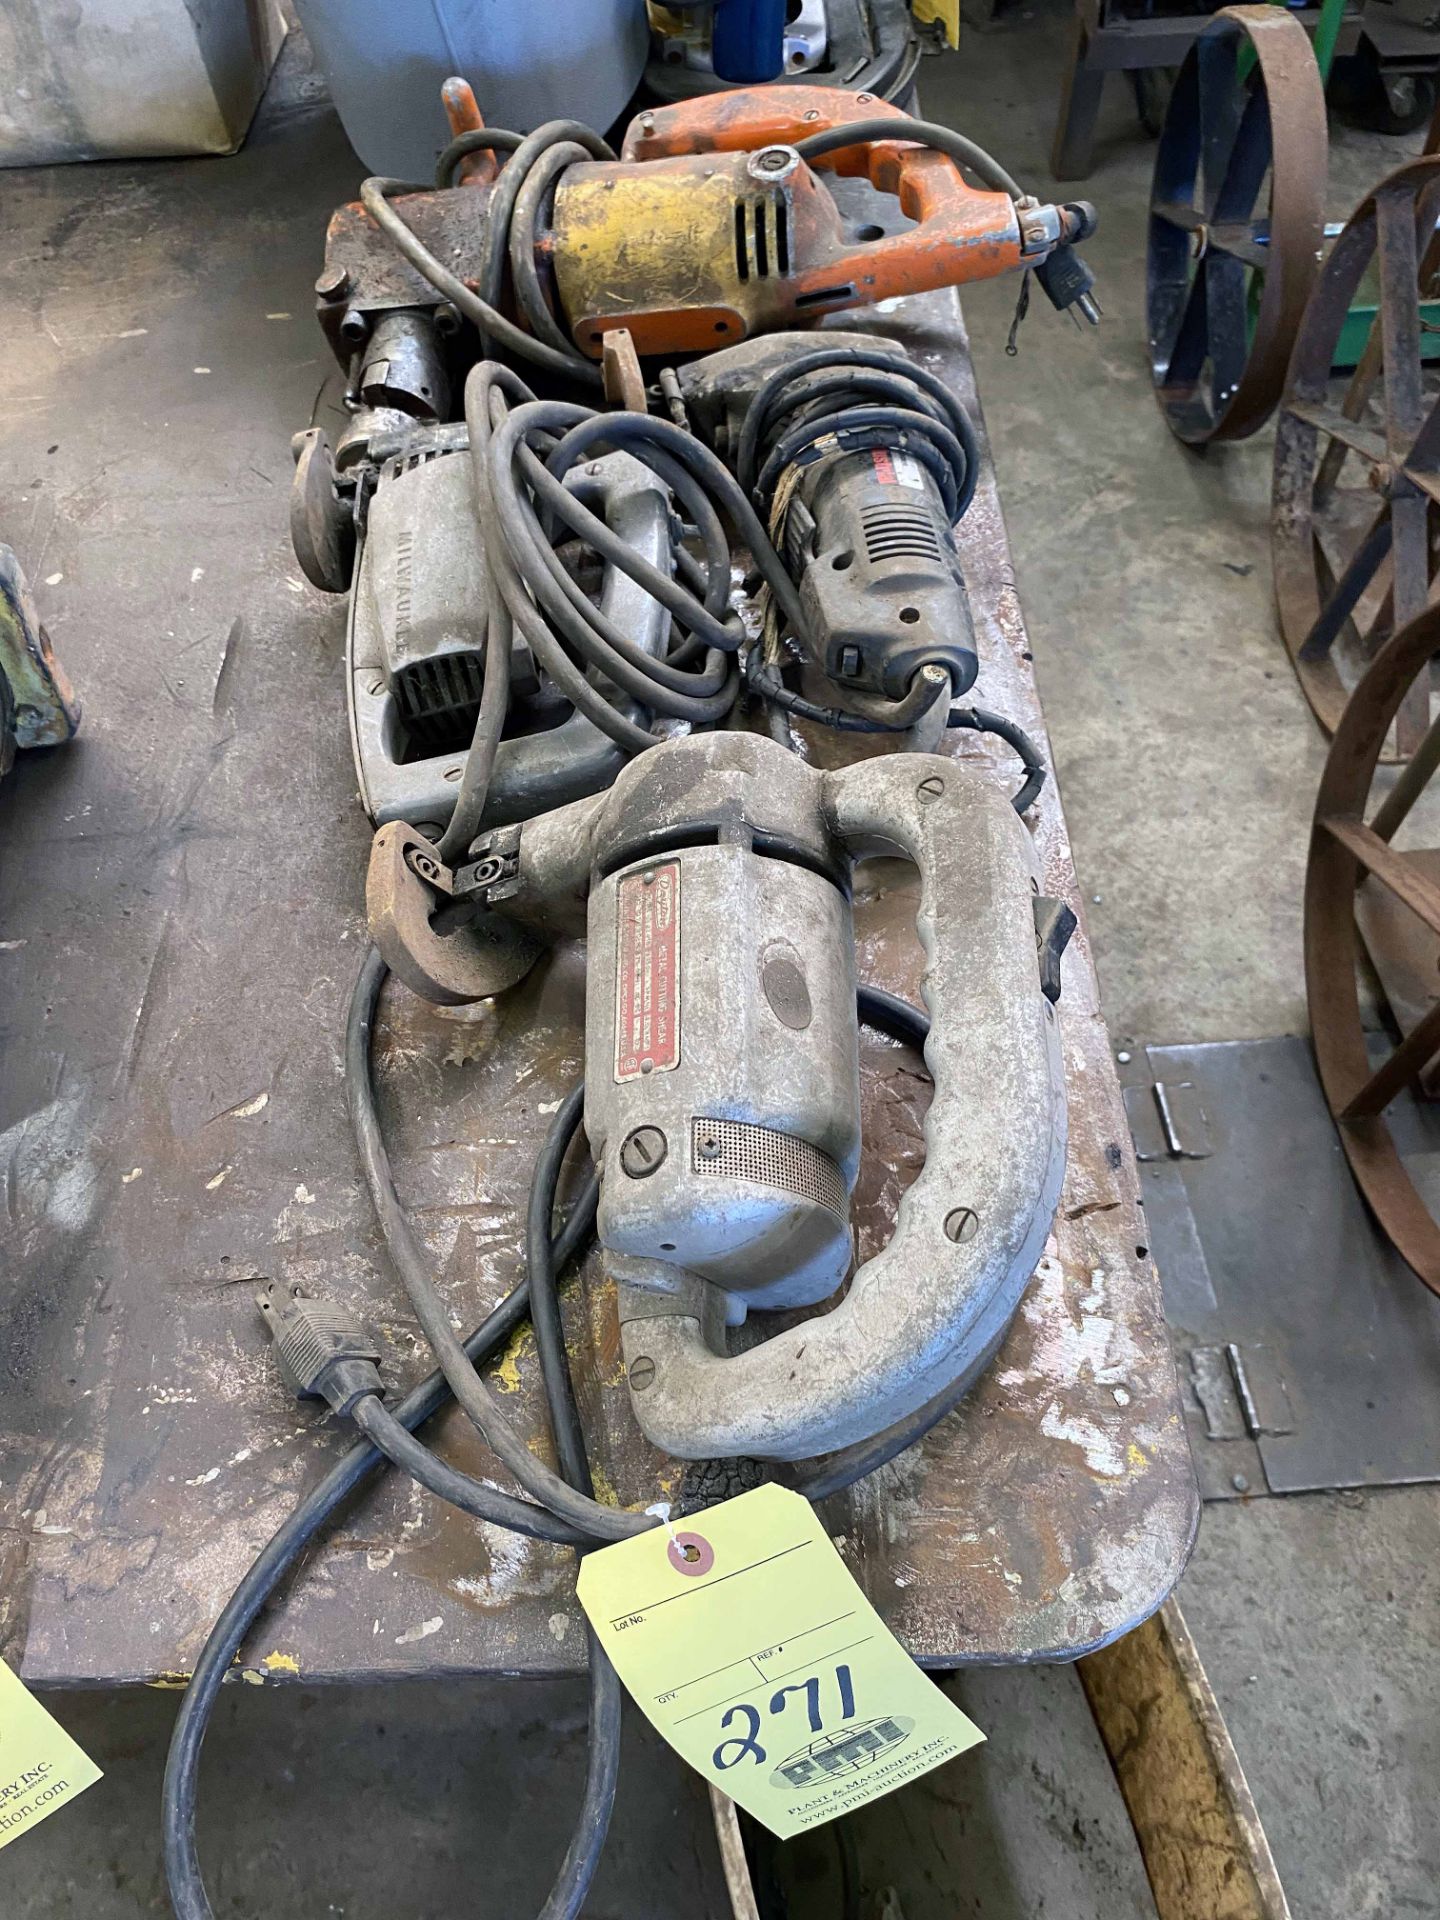 LOT OF ELECTRIC SHEARS (Located at: Summit Seals, 750 Archie Street, Vidor, TX 77662)